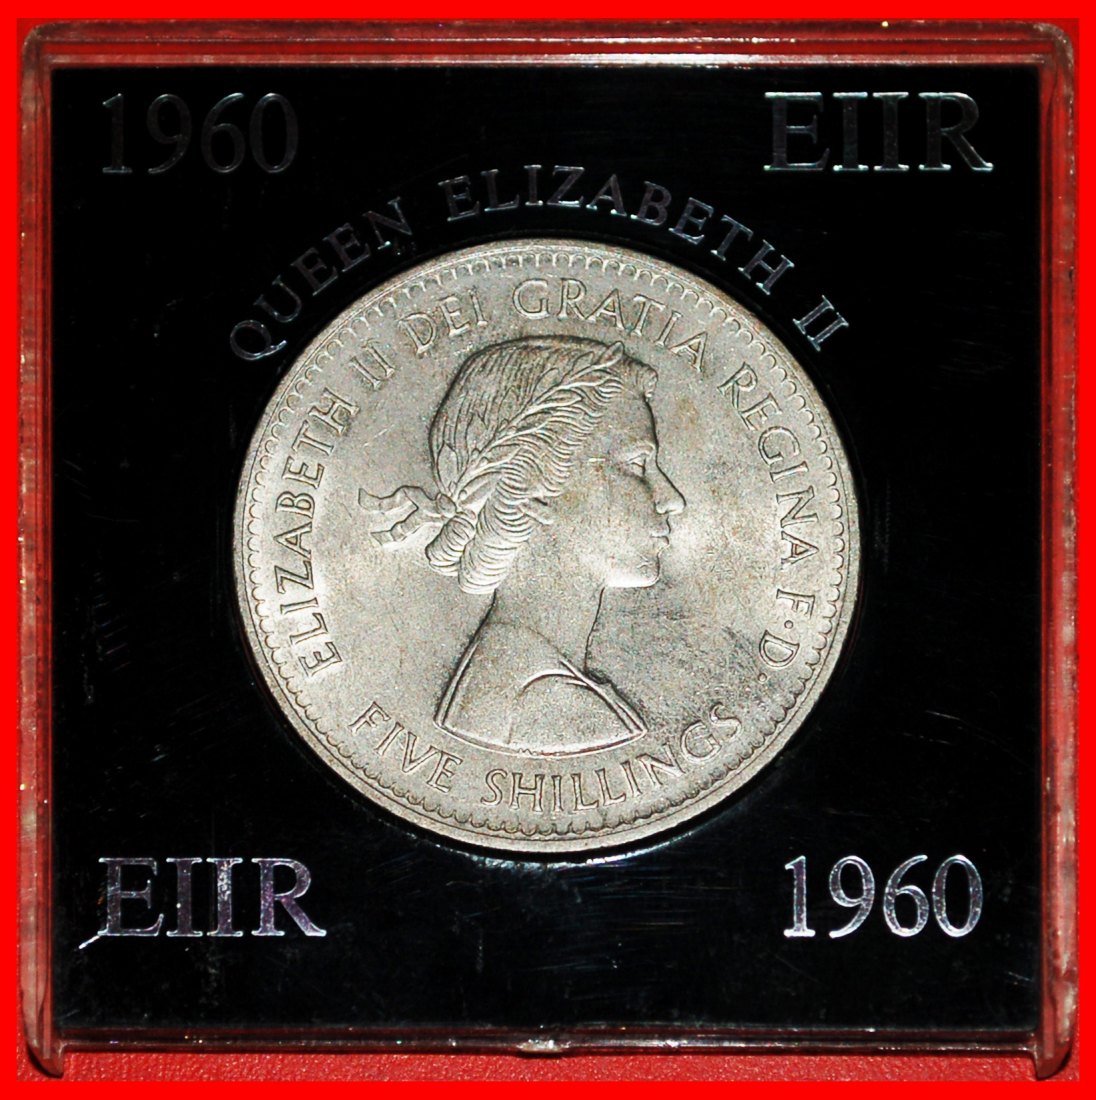  * USA EXHIBITION: GREAT BRITAIN ★ 5 SHILLINGS 1960! IN COIN BOX!★LOW START ★ NO RESERVE!   